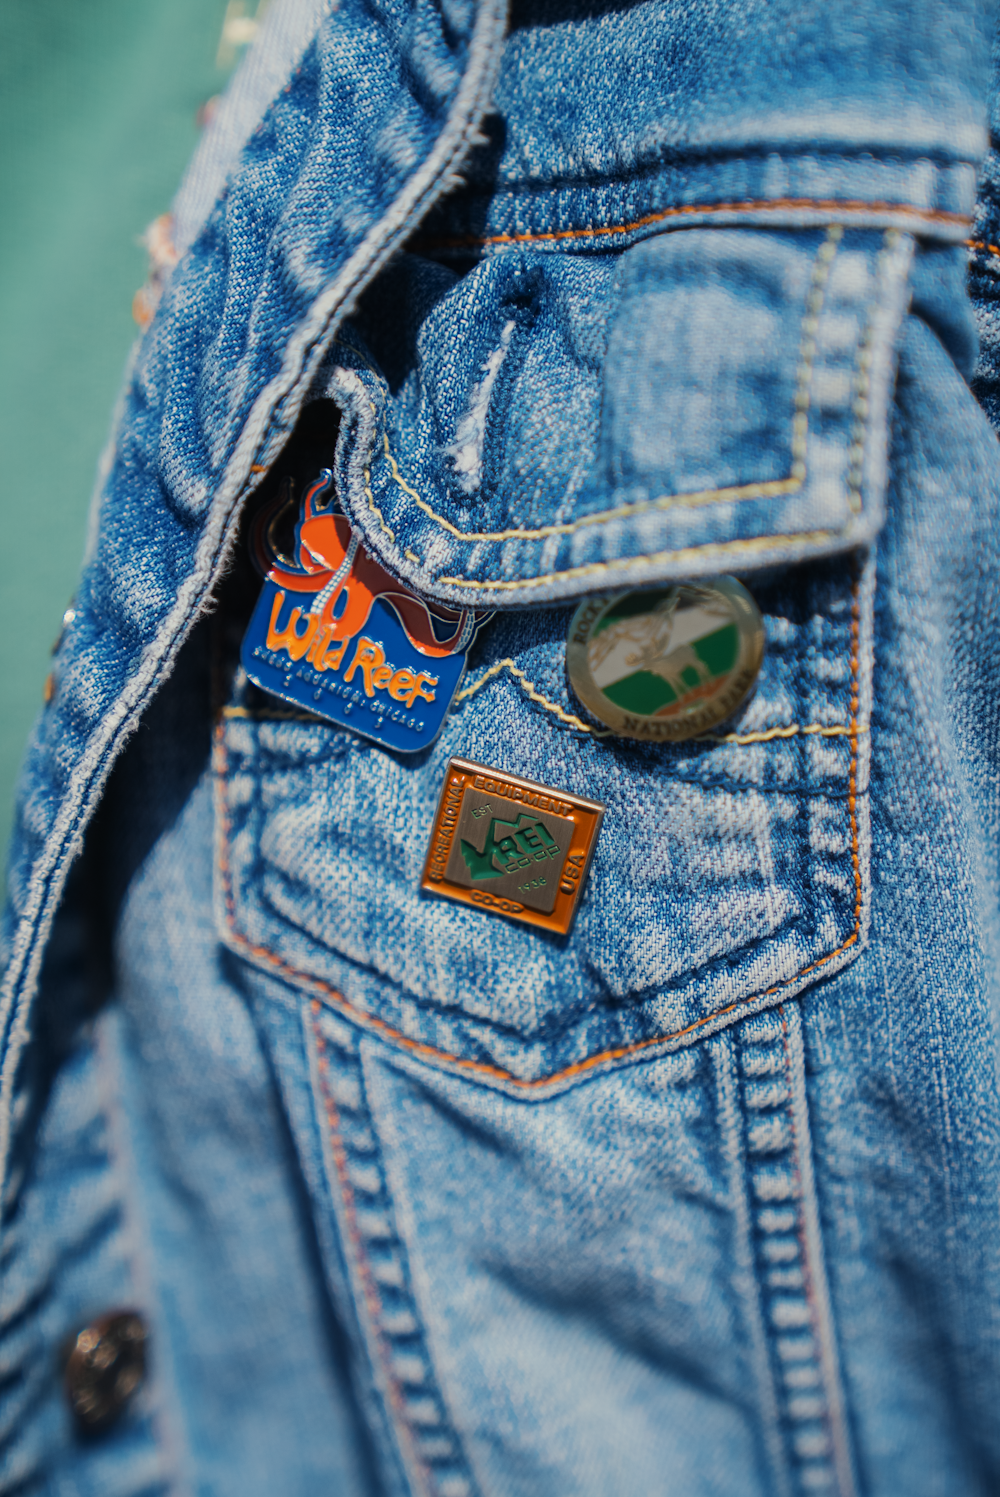 a close up of a person wearing a jean jacket